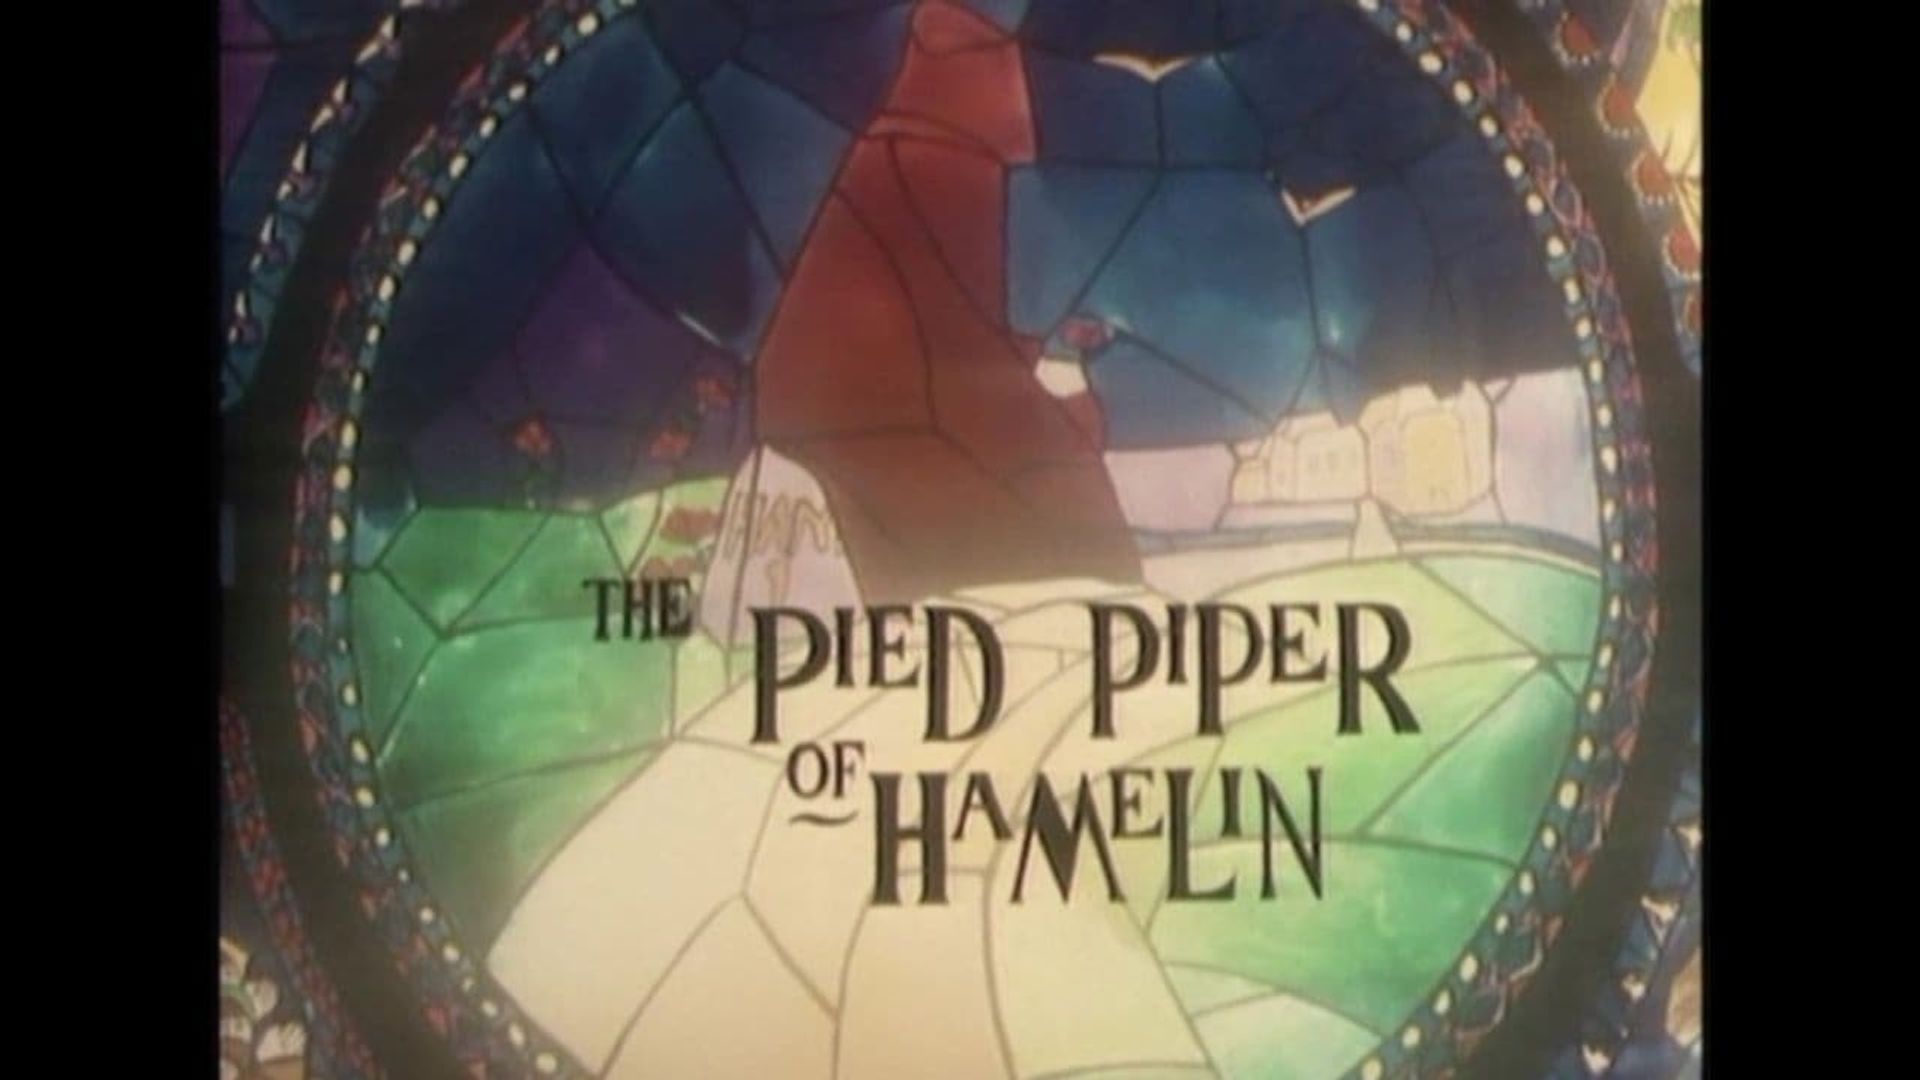 The Pied Piper of Hamelin background